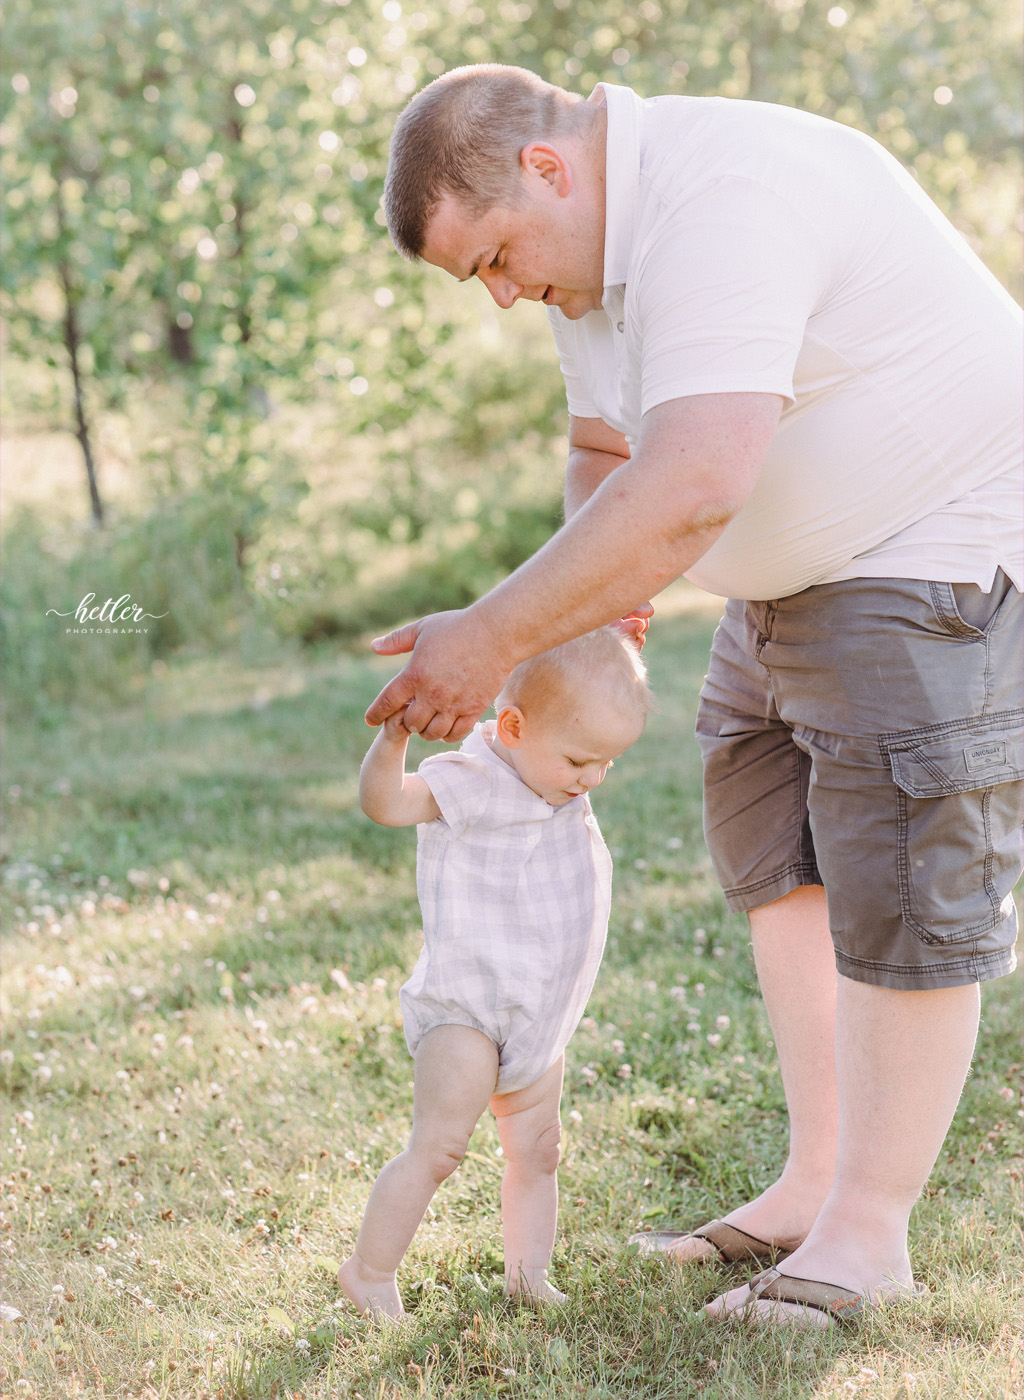 Grand Rapids family mini session at Wahlfield Park in the summer